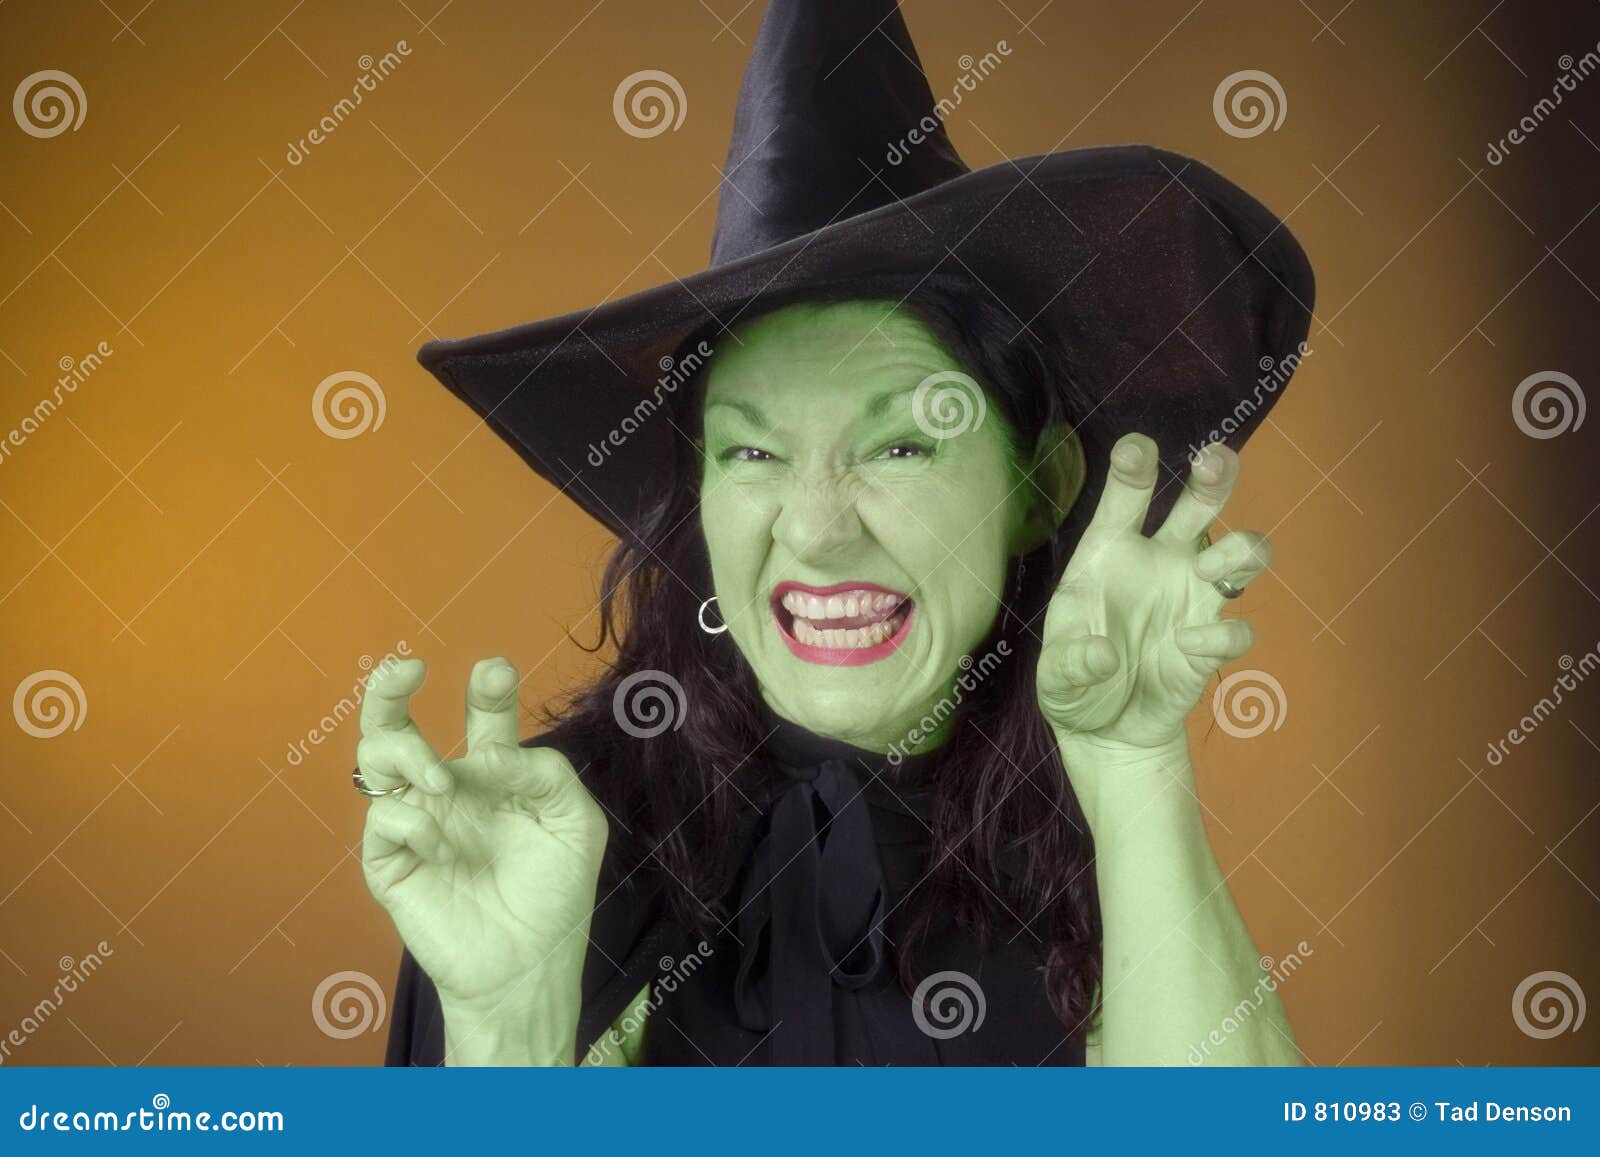 126,598 Witch Photos - Free & Royalty-Free Stock Photos from Dreamstime